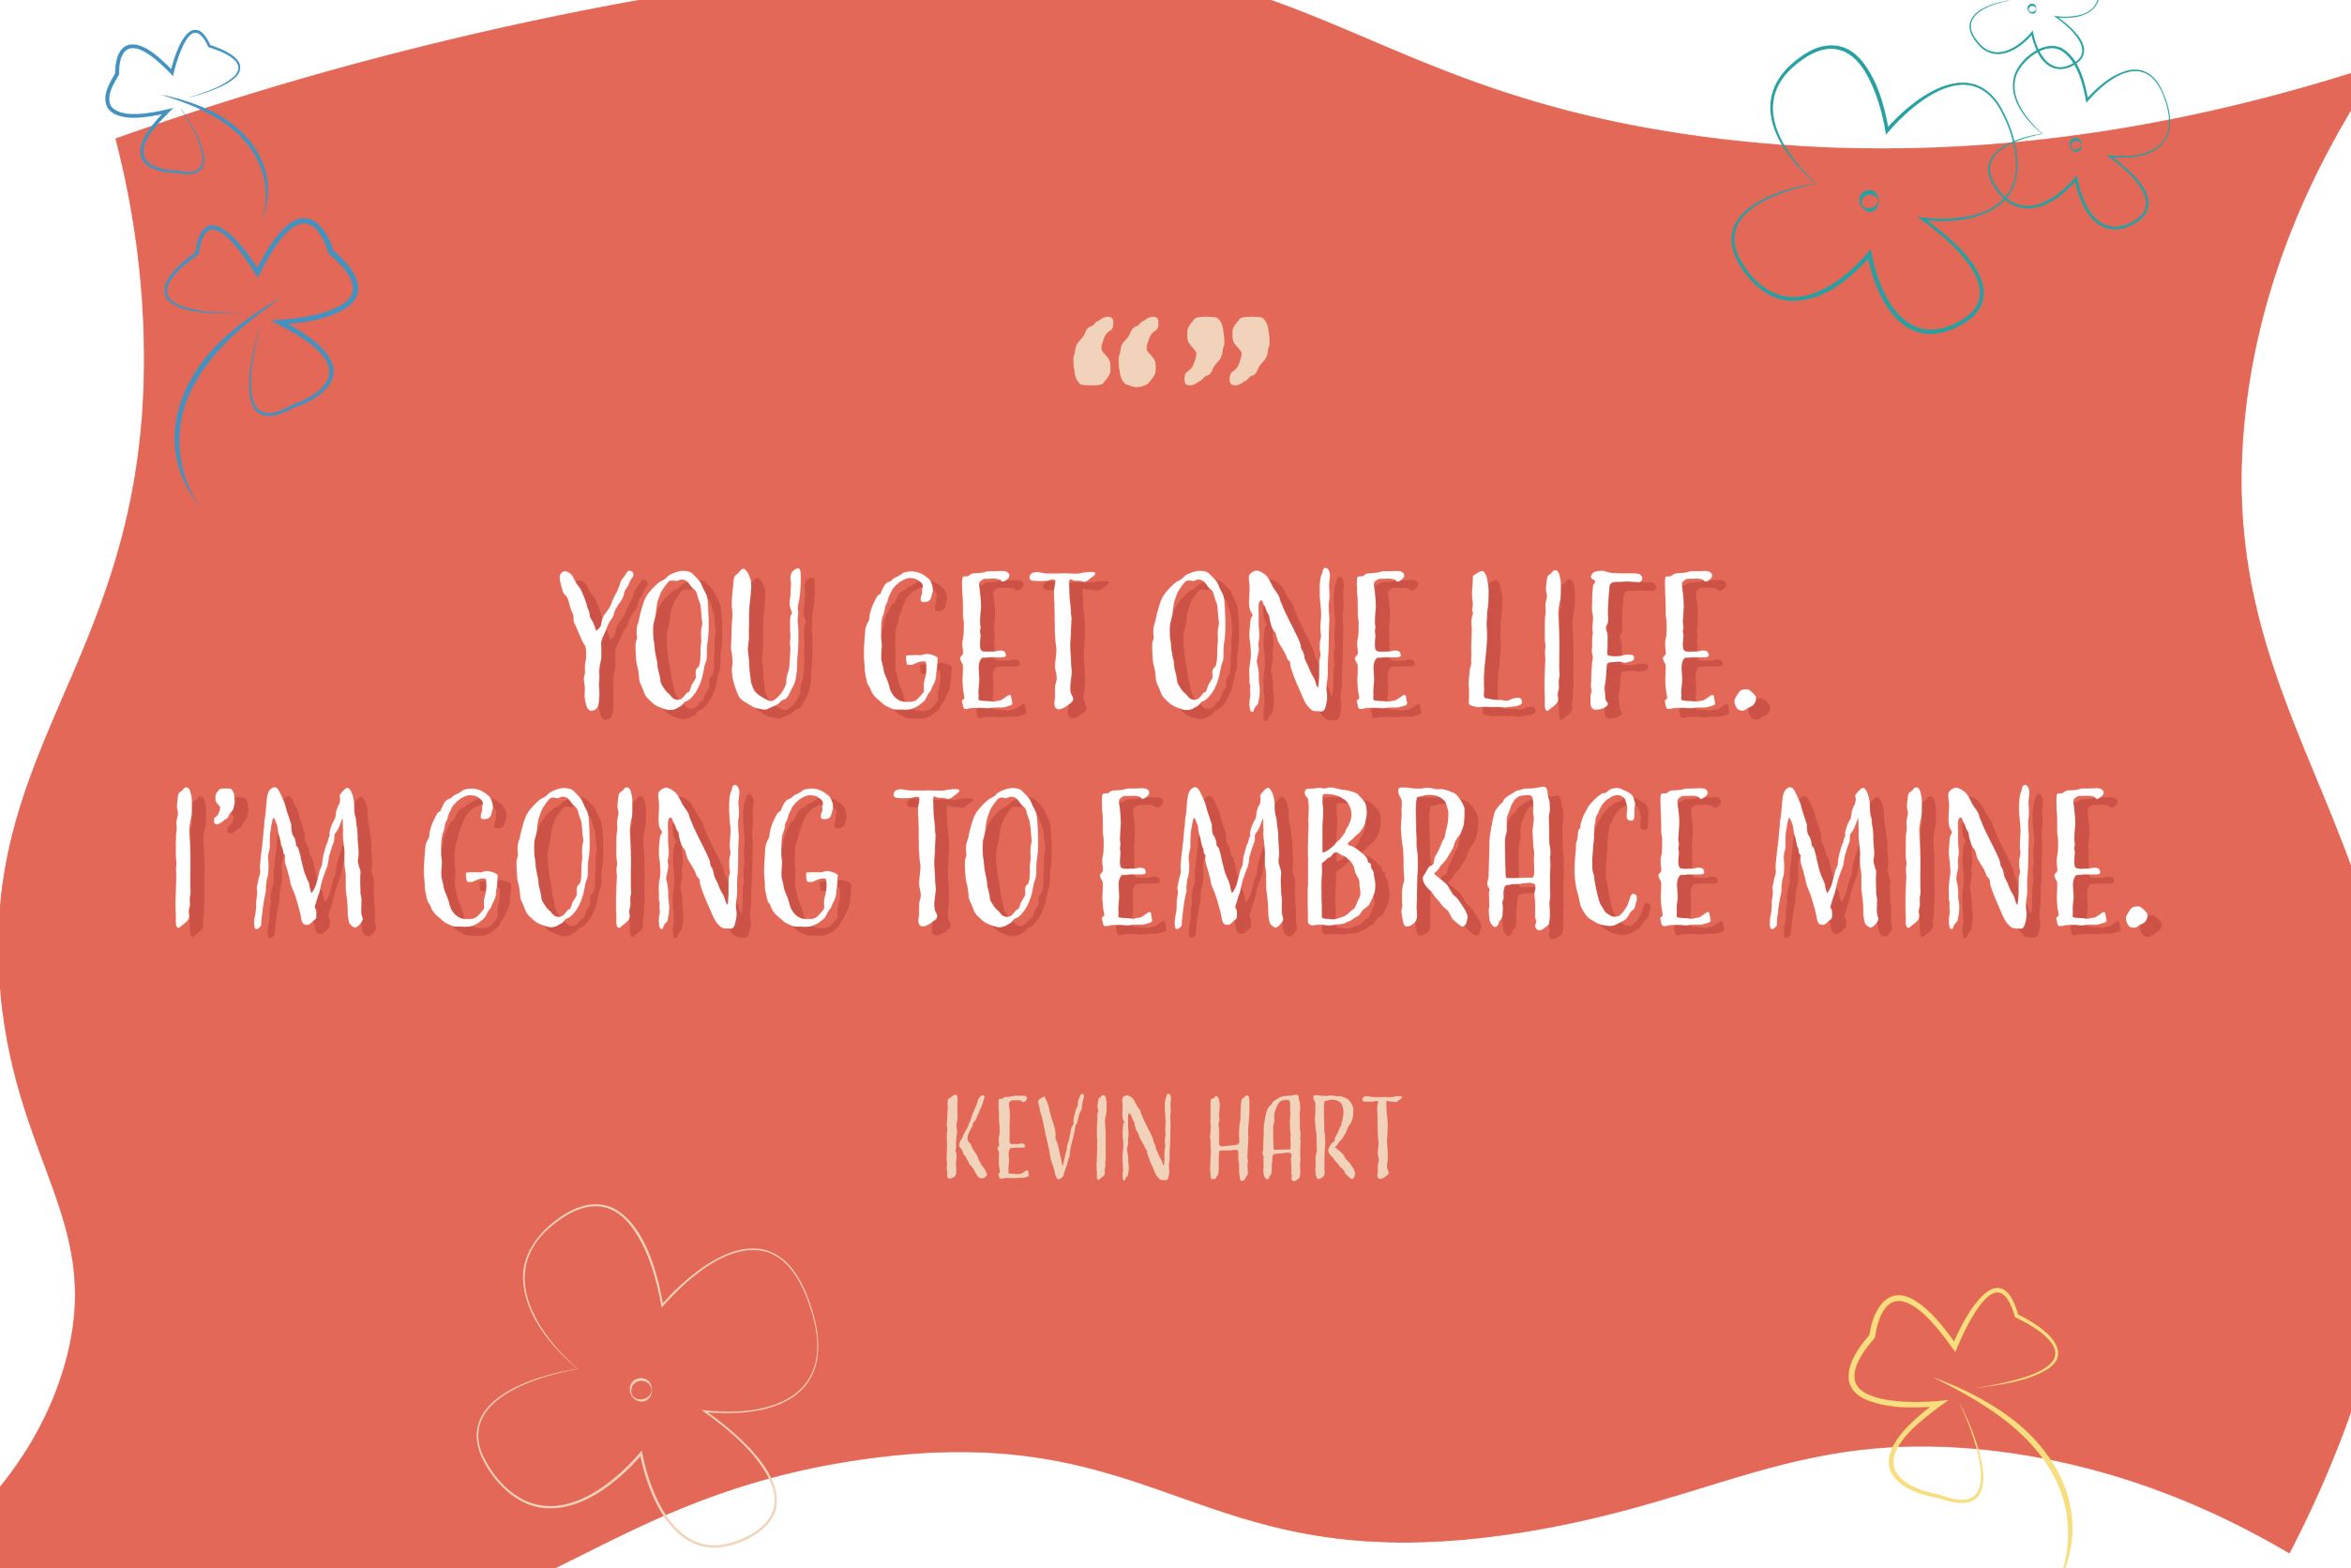 “You get one life. I’m going to embrace mine.”- Kevin Hart